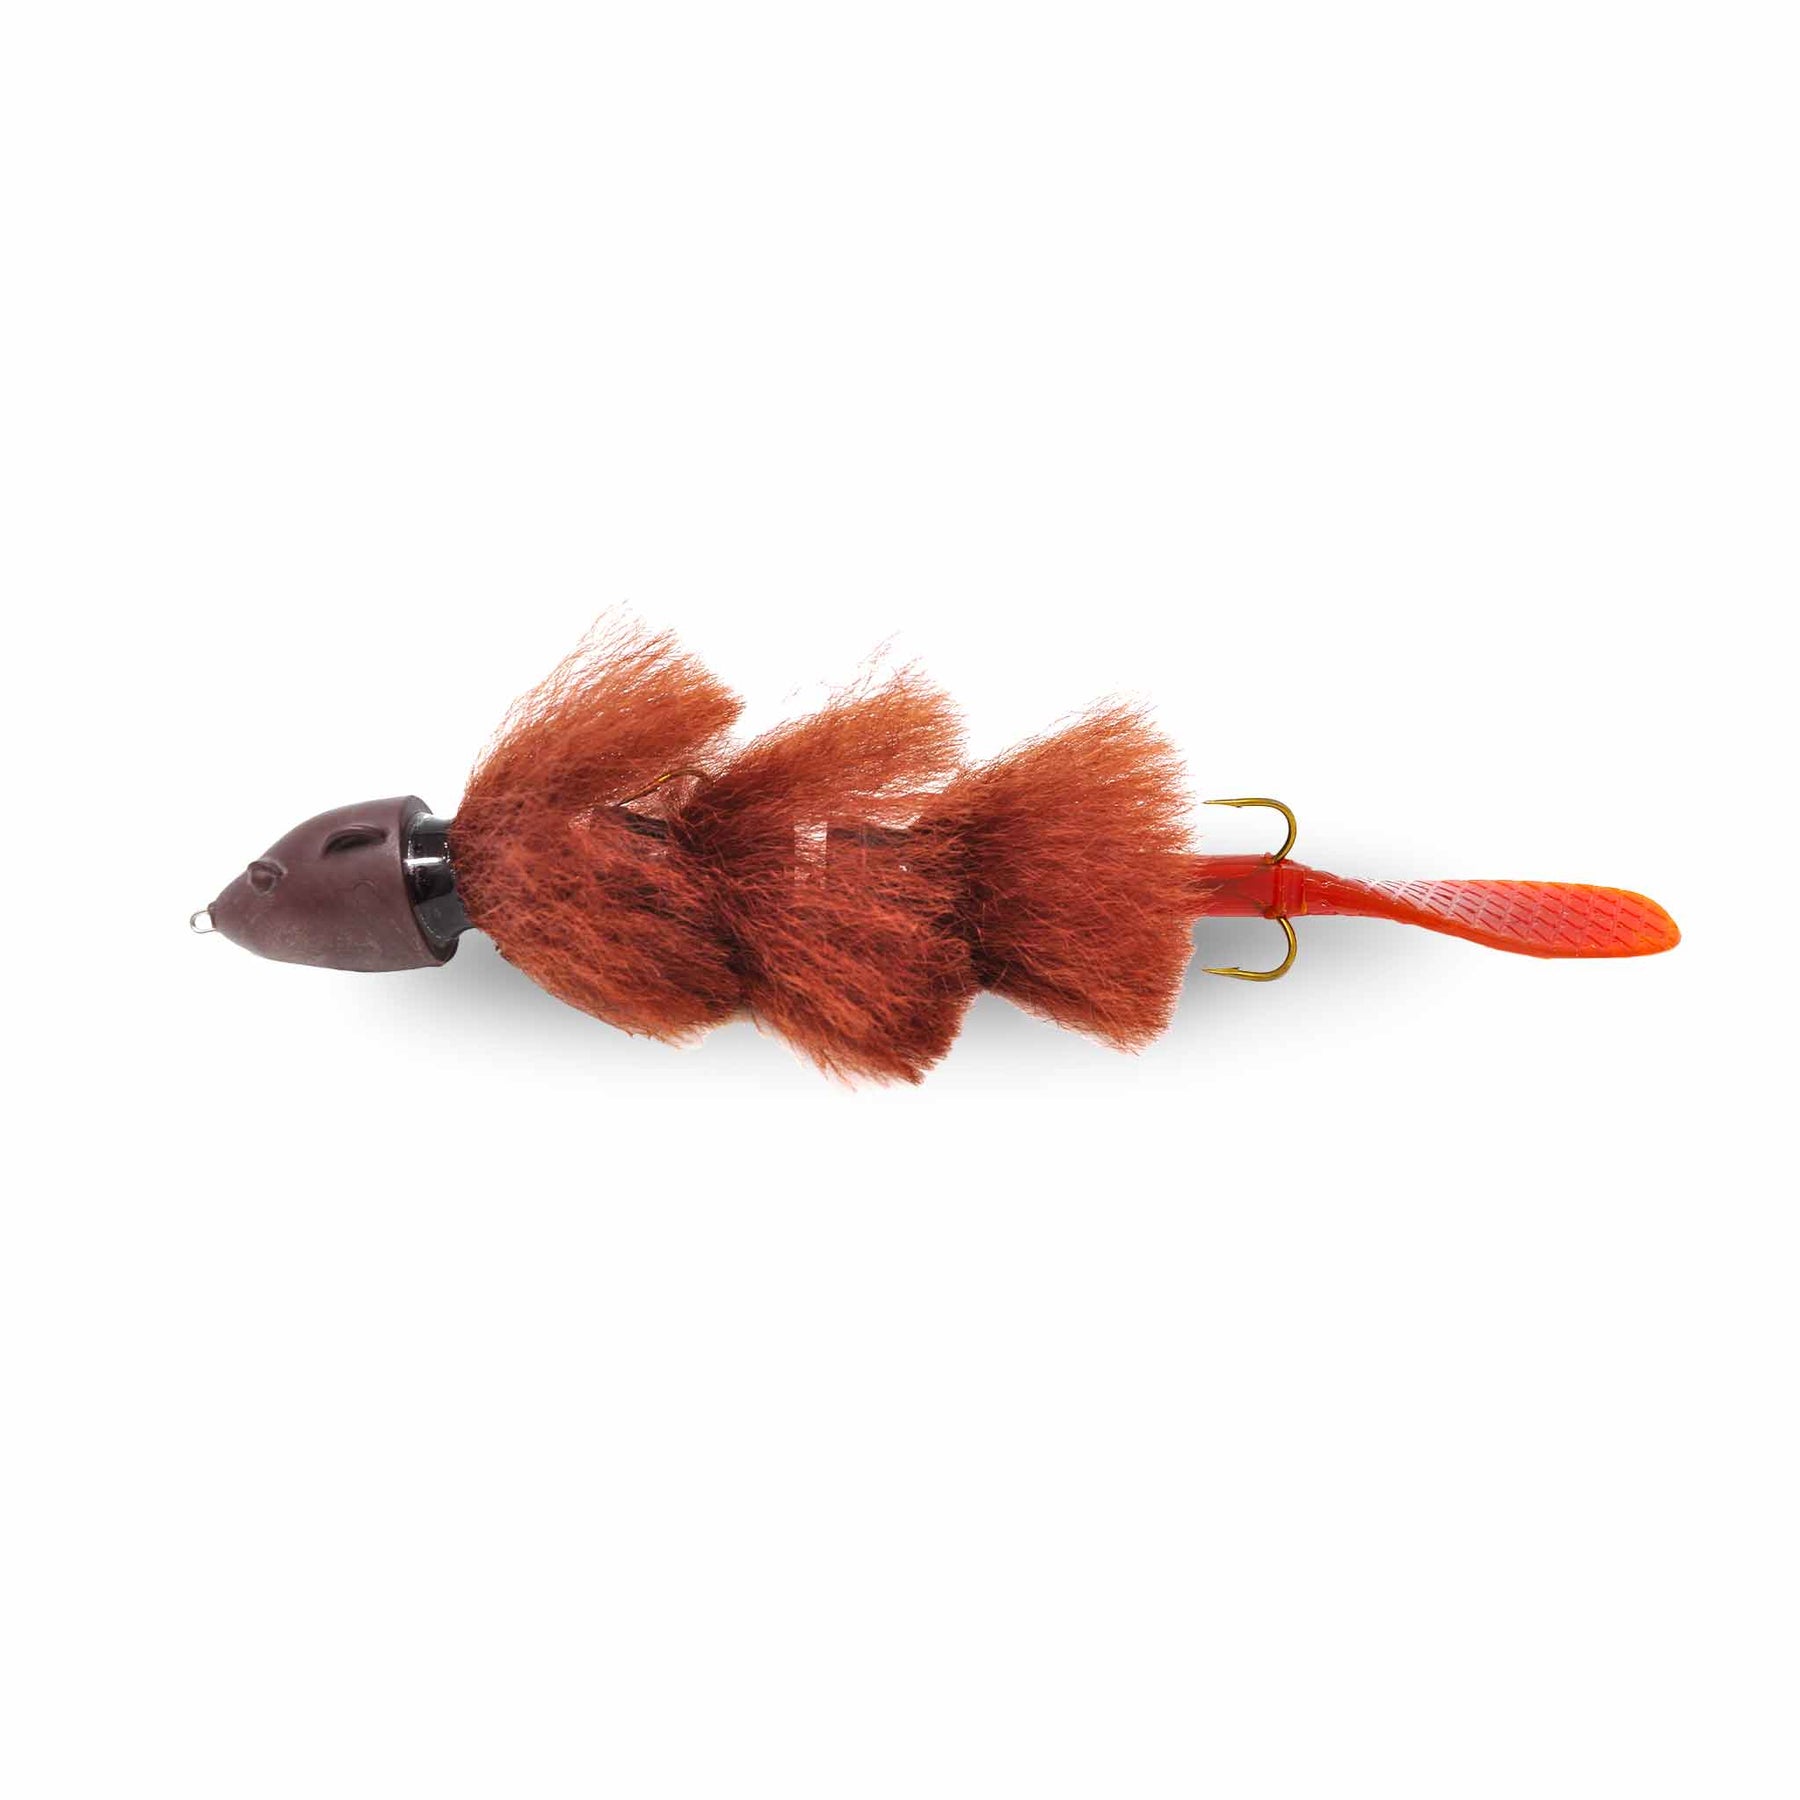 Beaver Lures and baits